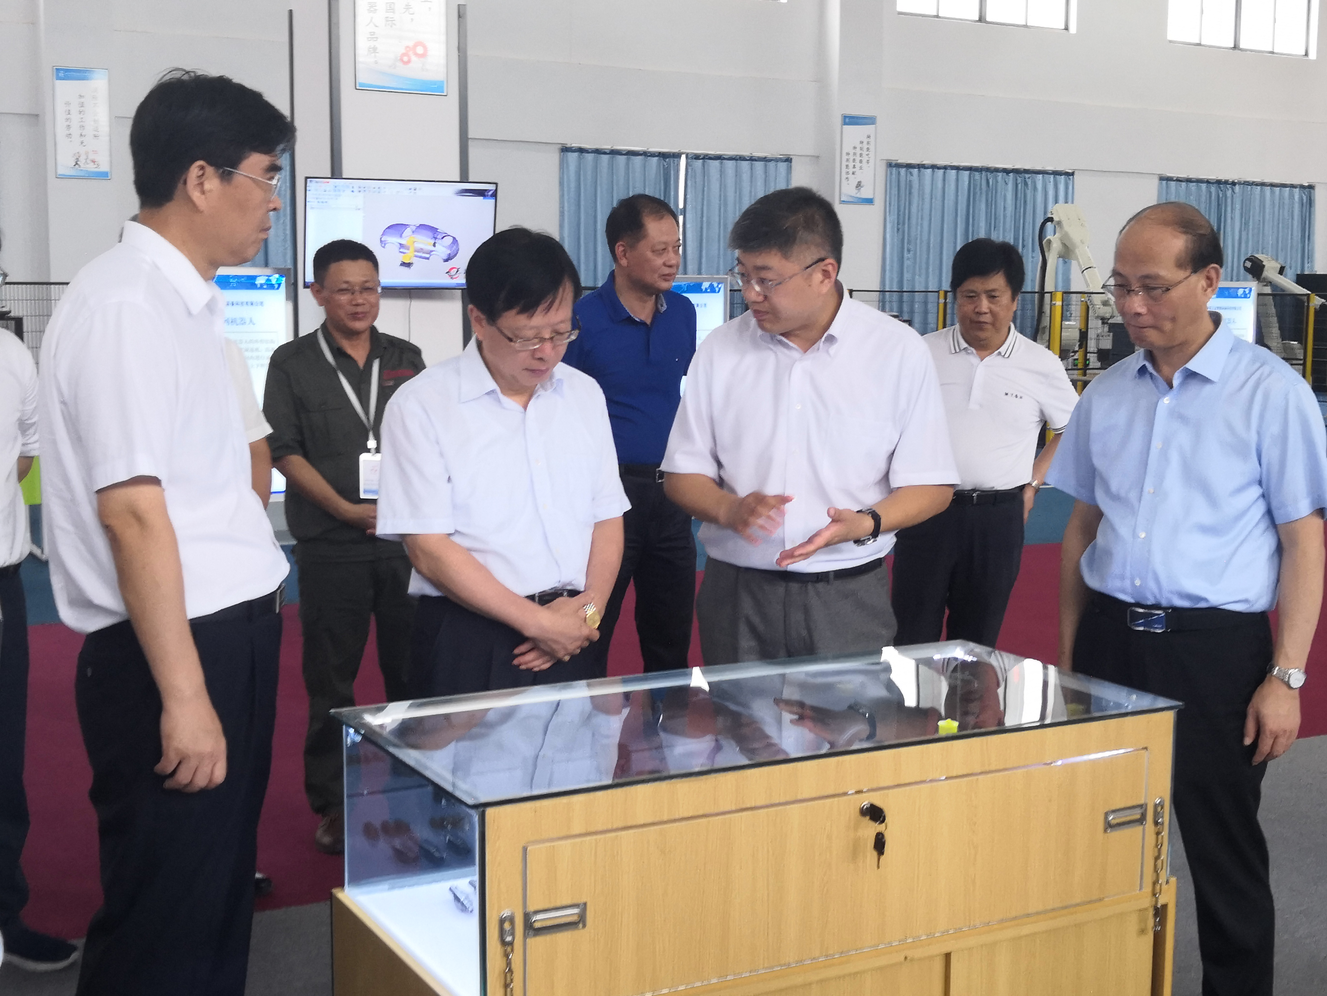 Ding Xuedong, member of the Central Committee of the Communist Party of China and executive deputy secretary-general of the State Council, visited the company for research and guidance